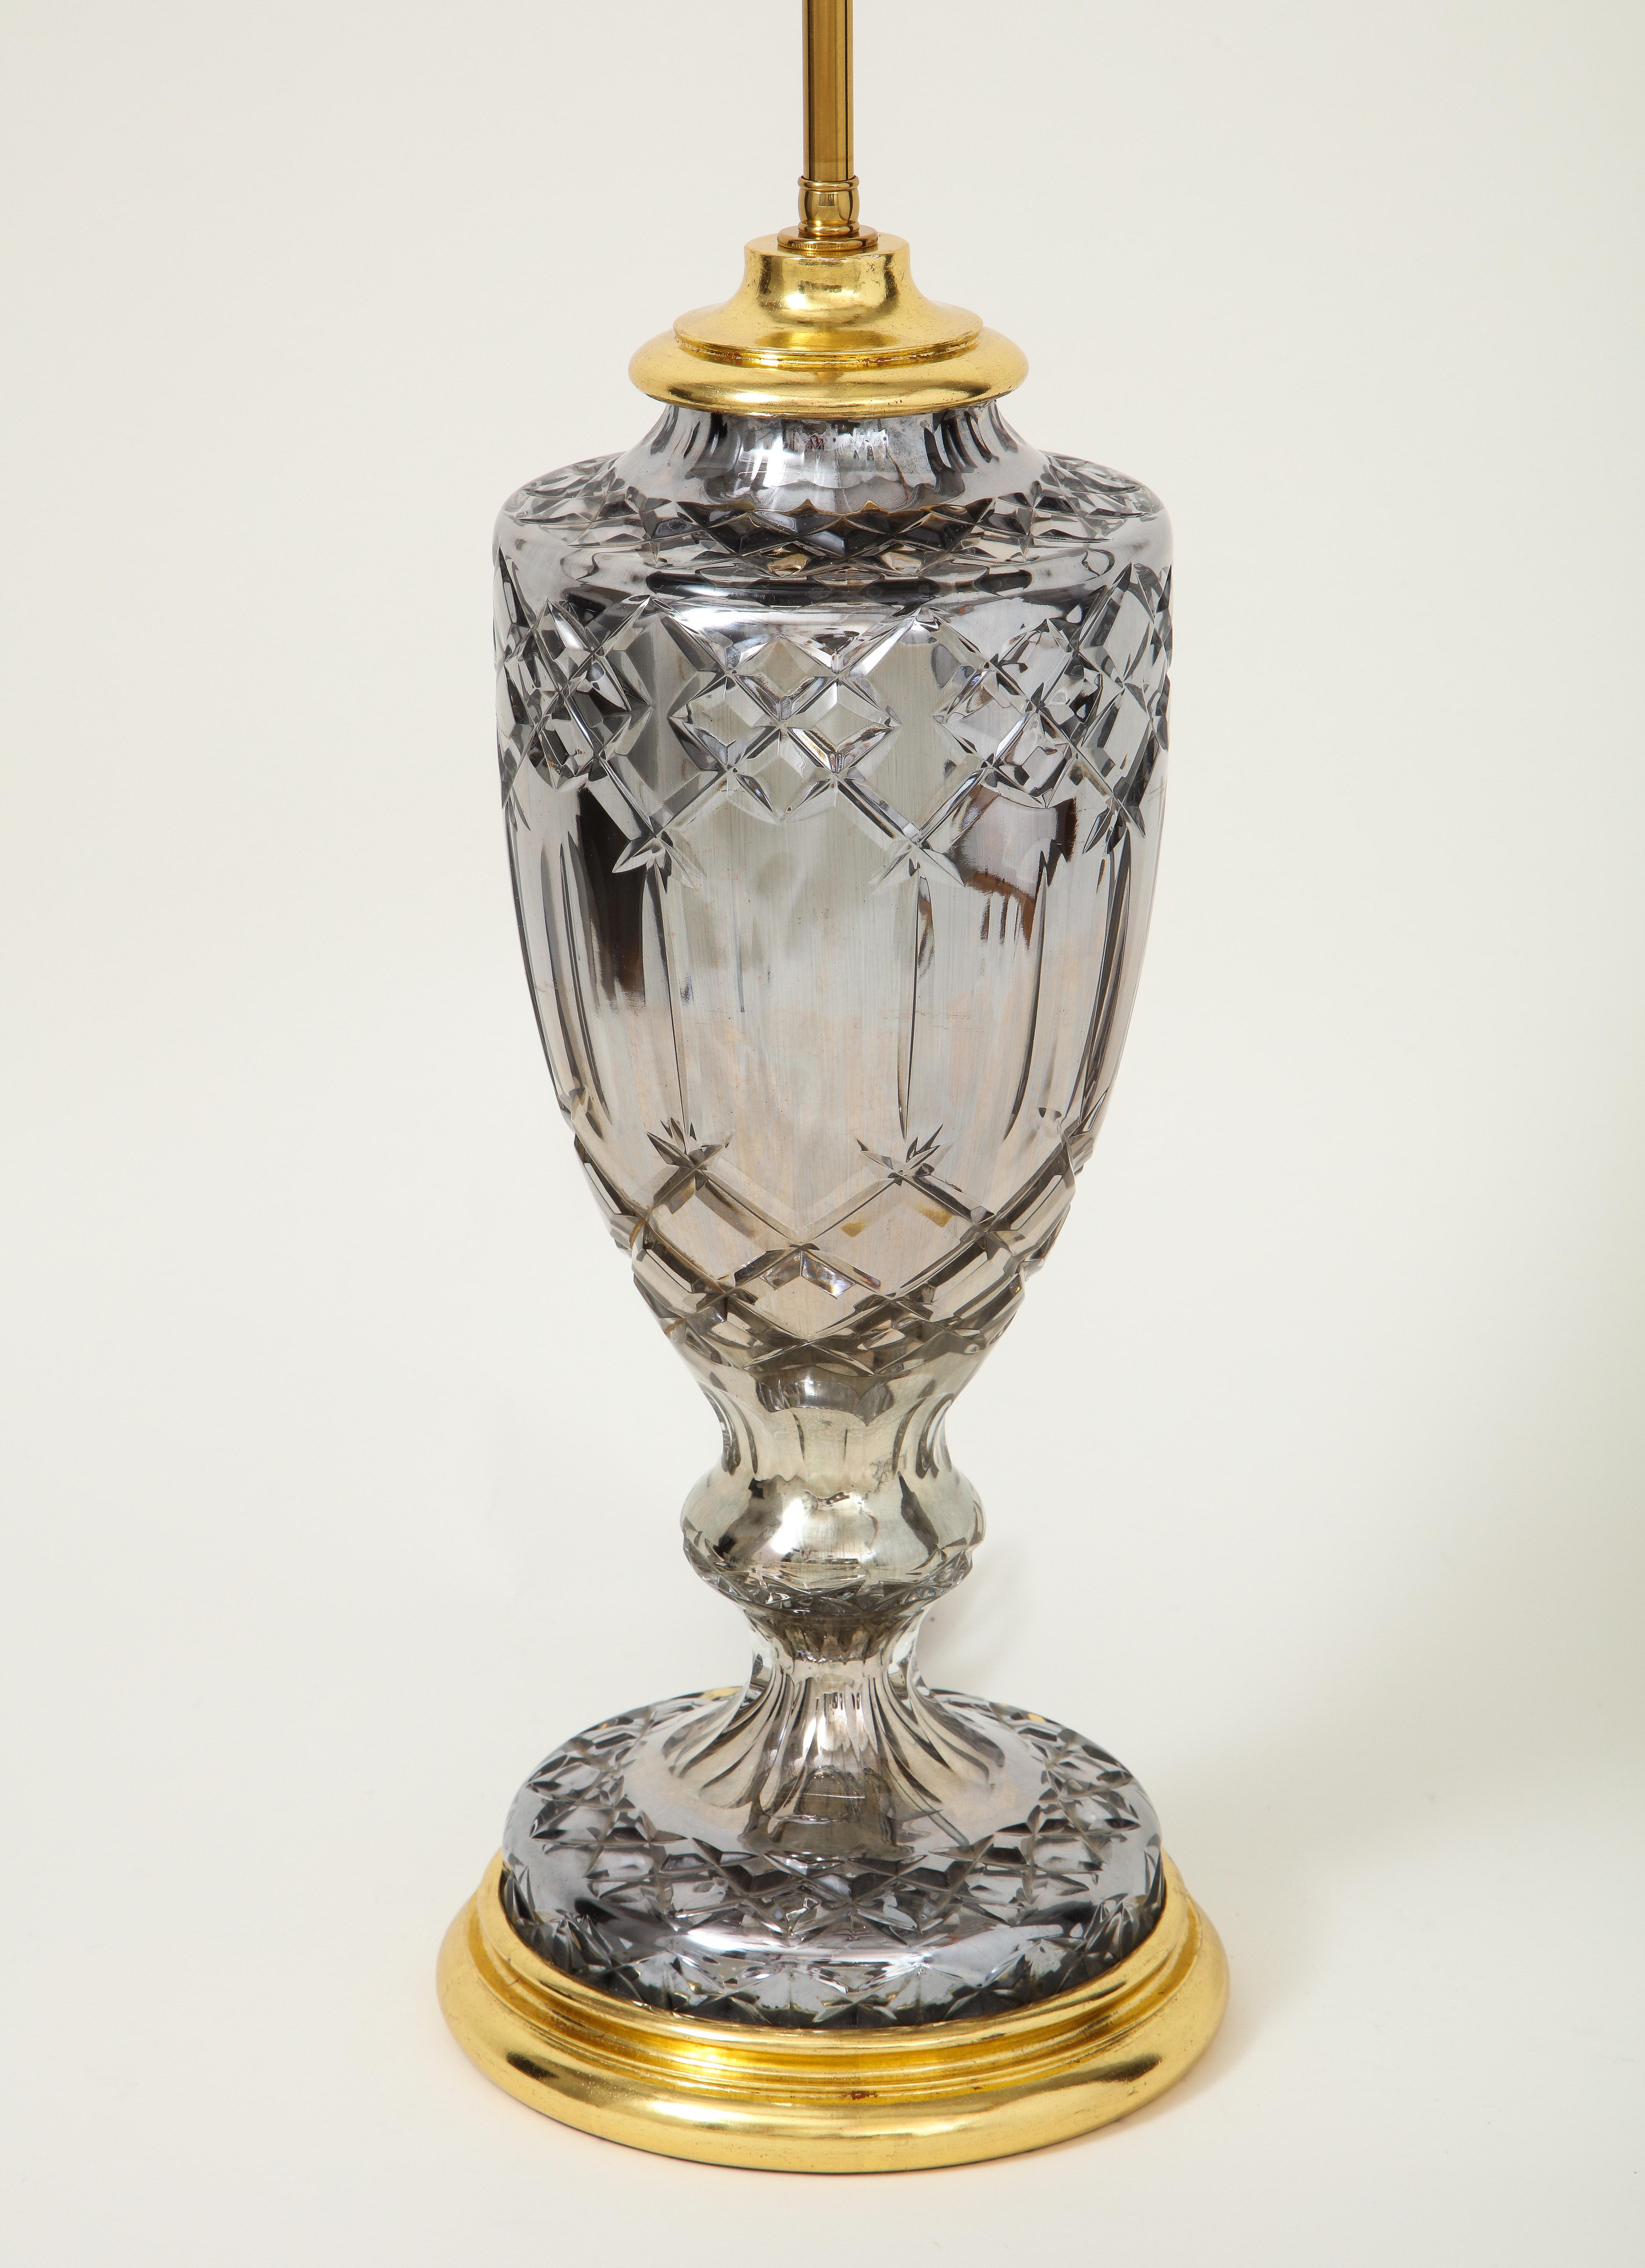 Glamorous combination of gray and gold. In the form of a vase on stand, enriched with cut diaperwork. Mounted a turned gilt base and mounted with an adjustable rod and two light sockets. Height to top of vase is 18